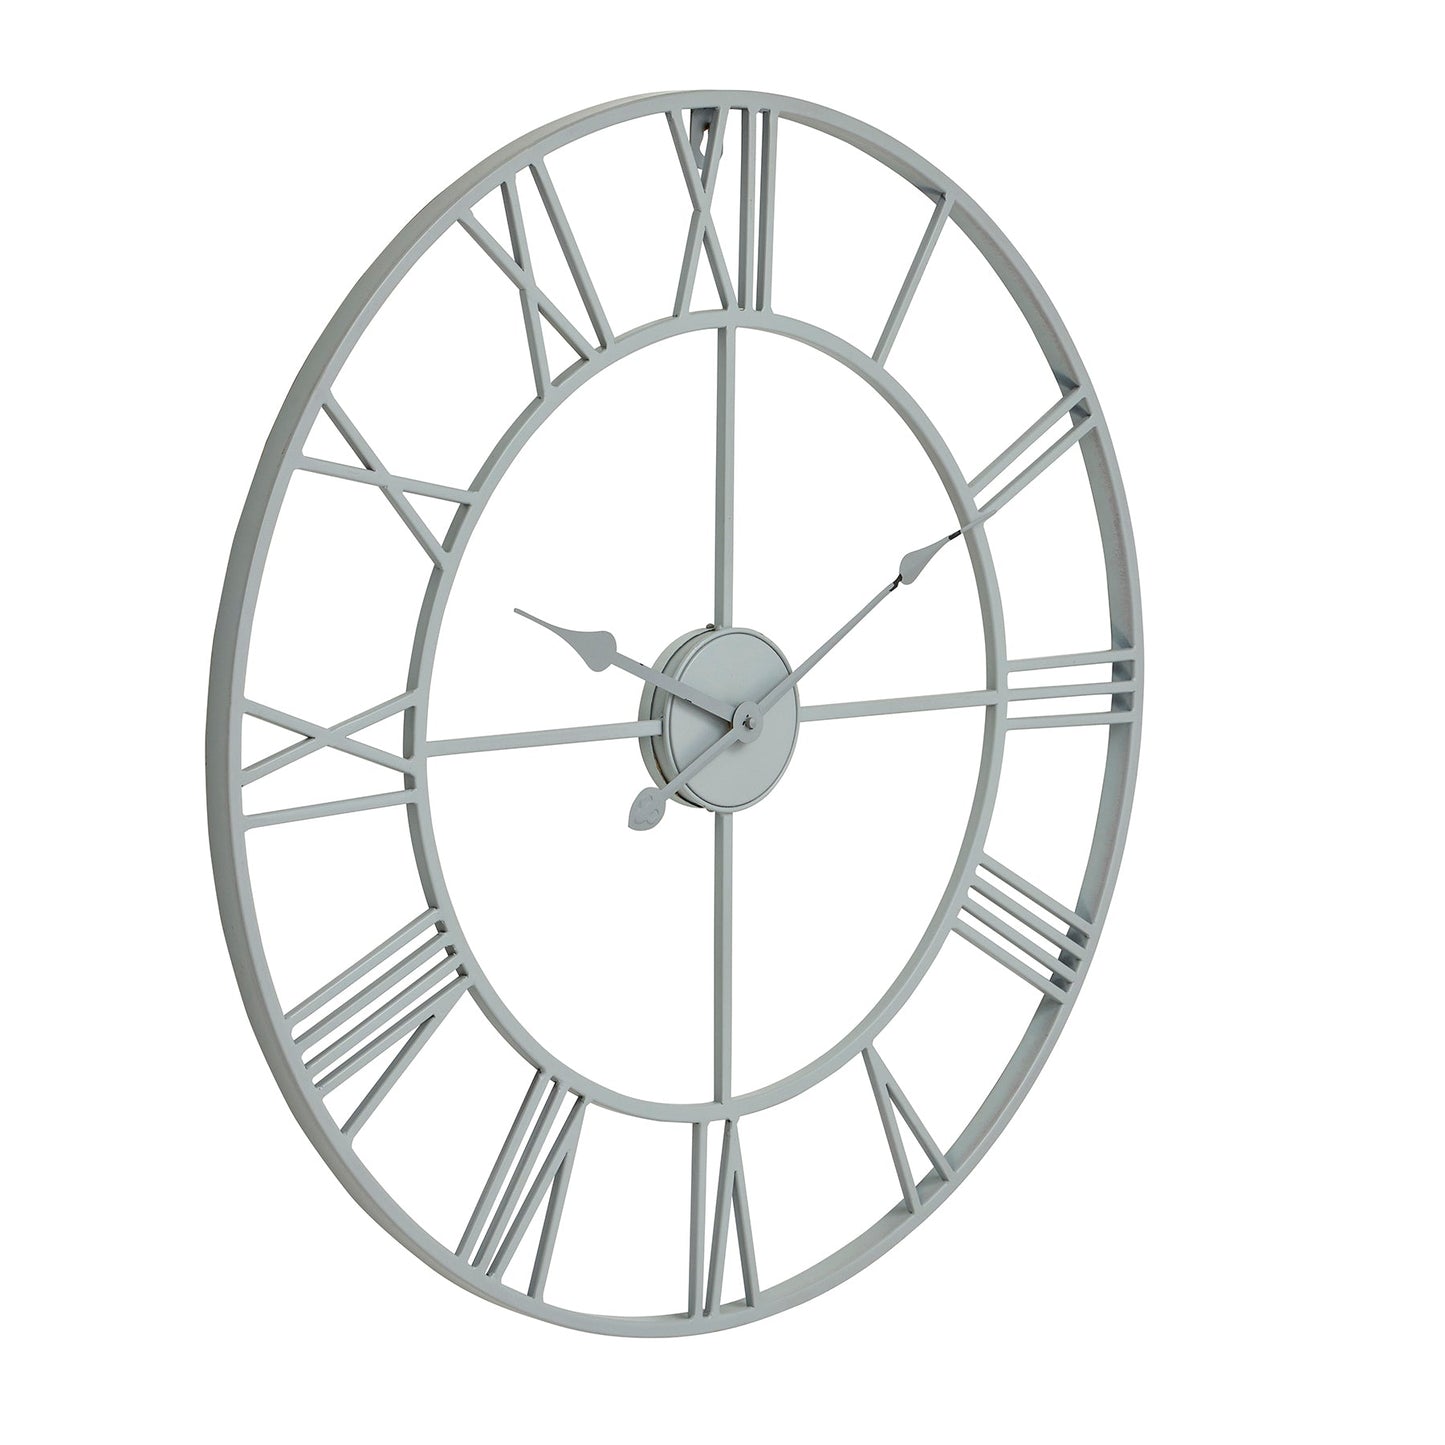 Grey Skeleton Wall Clock (21621) By Hill Interiors